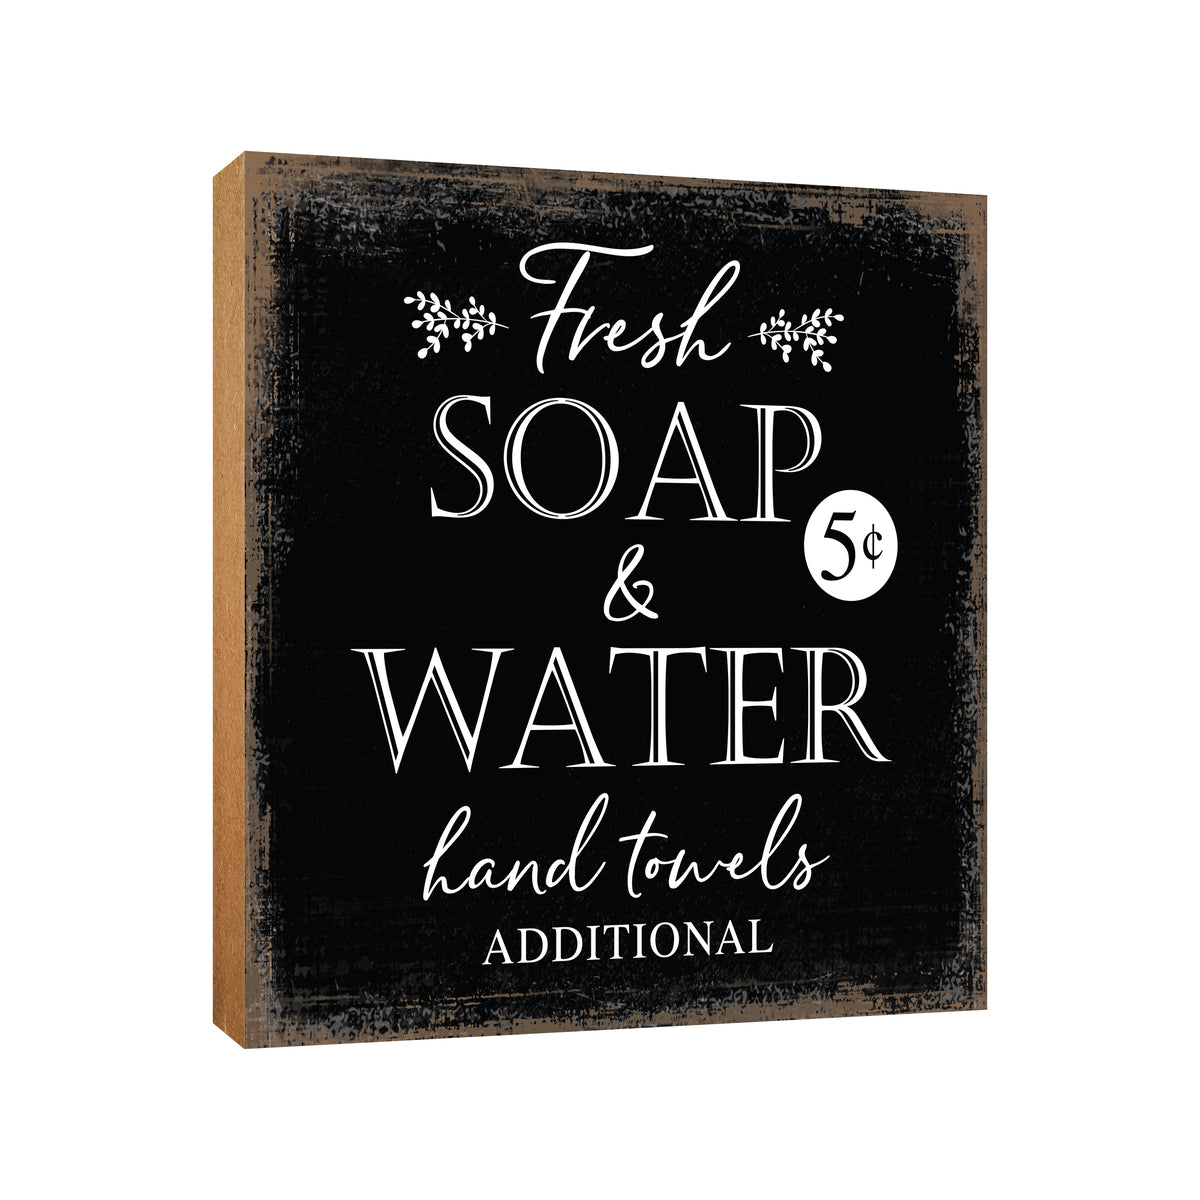 Wooden BATHROOM 6x6 Block shelf decor (Fresh Soap &amp; Water Additional) Inspirational Plaque Tabletop and Family Home Decoration